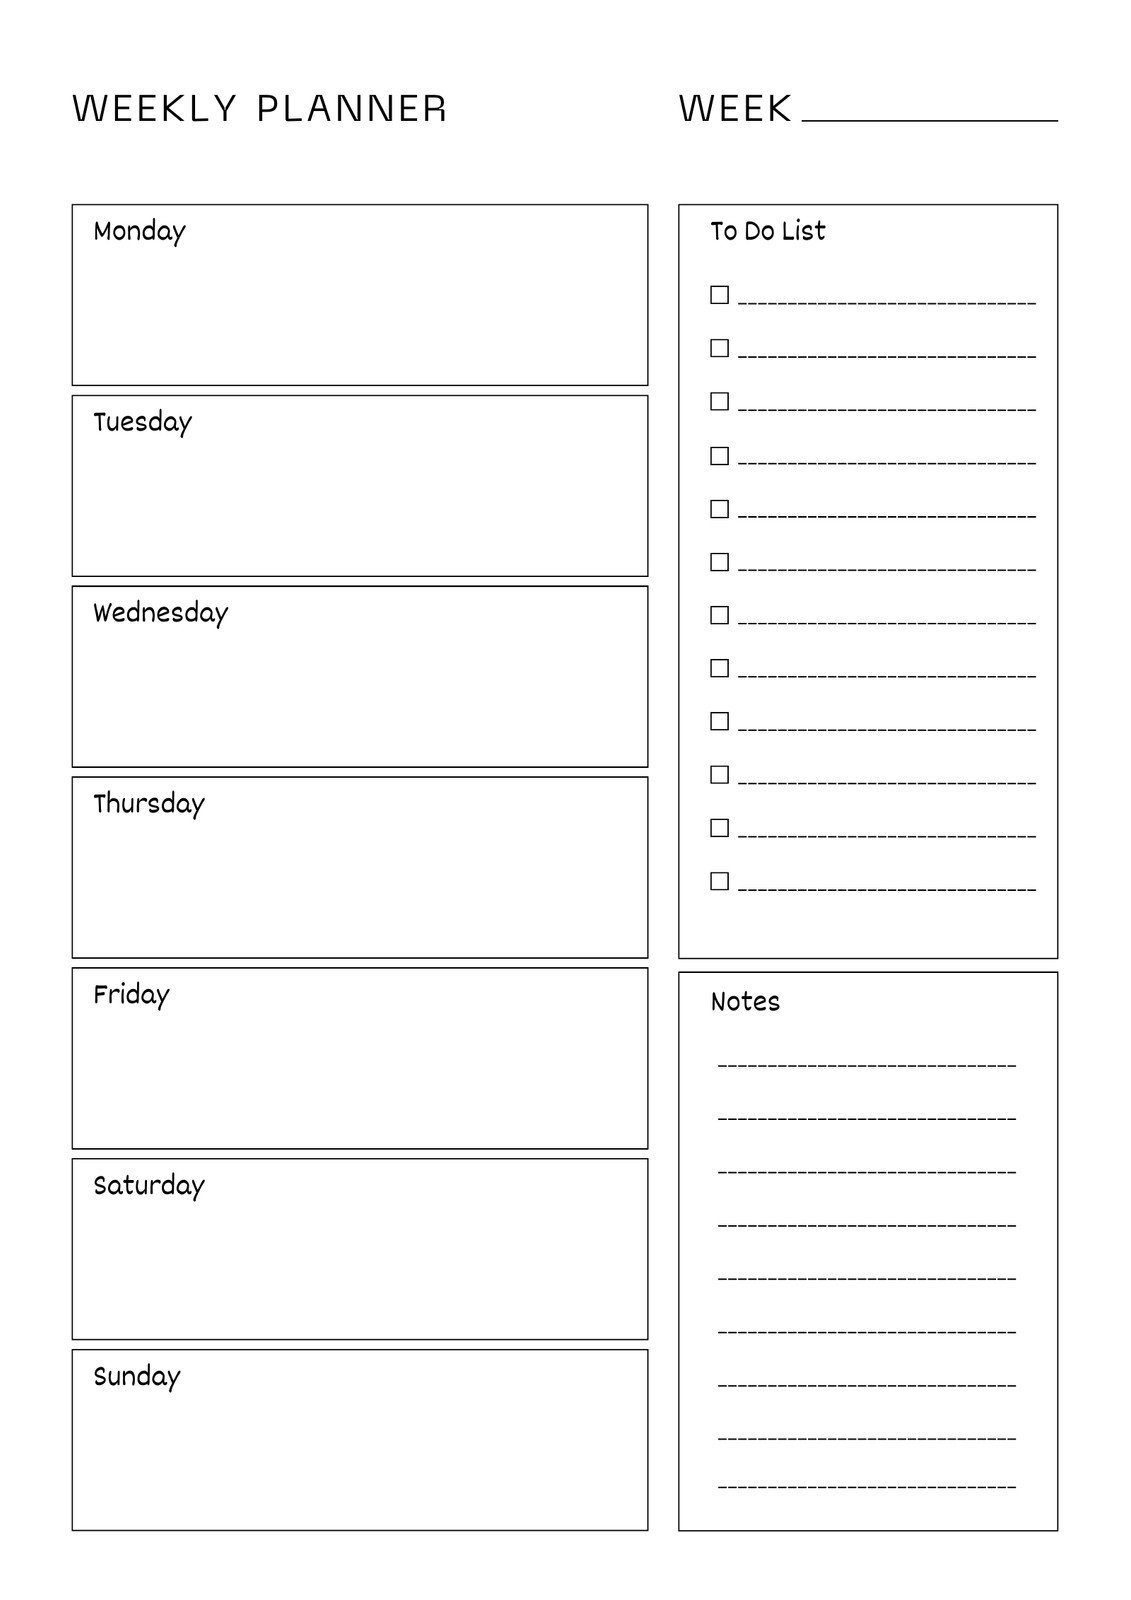 A Daily Planner Simple to Do List Organizer Downloadable 